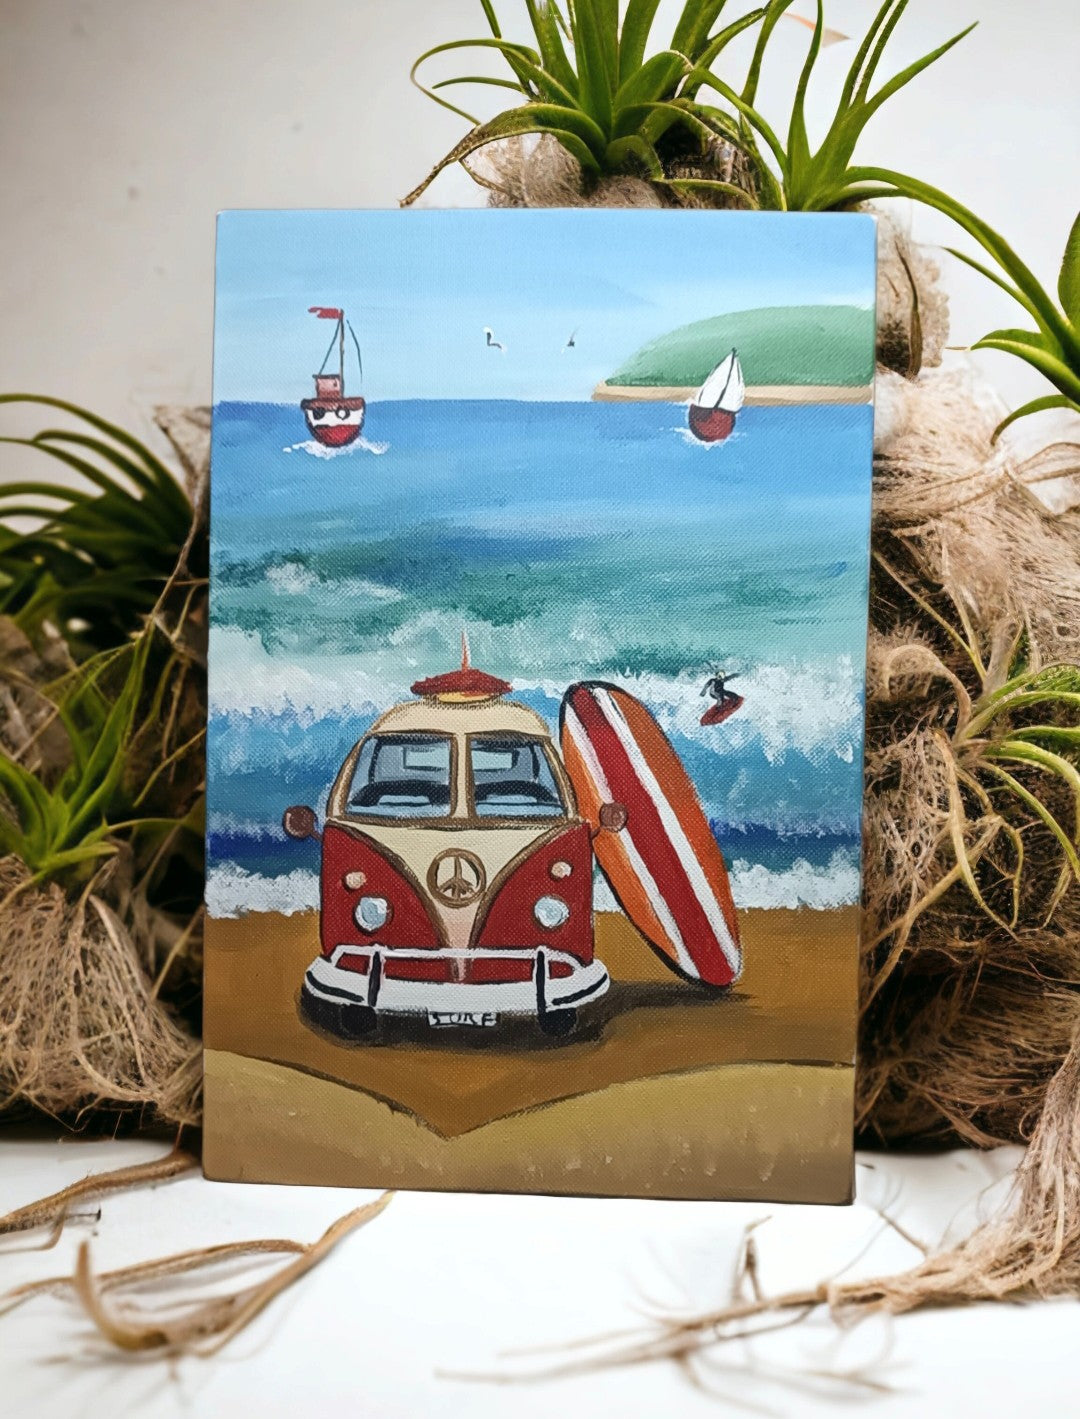 Emerald Blossoms - A hand painted canvas &quot;Stop: A Surfing Story&quot;